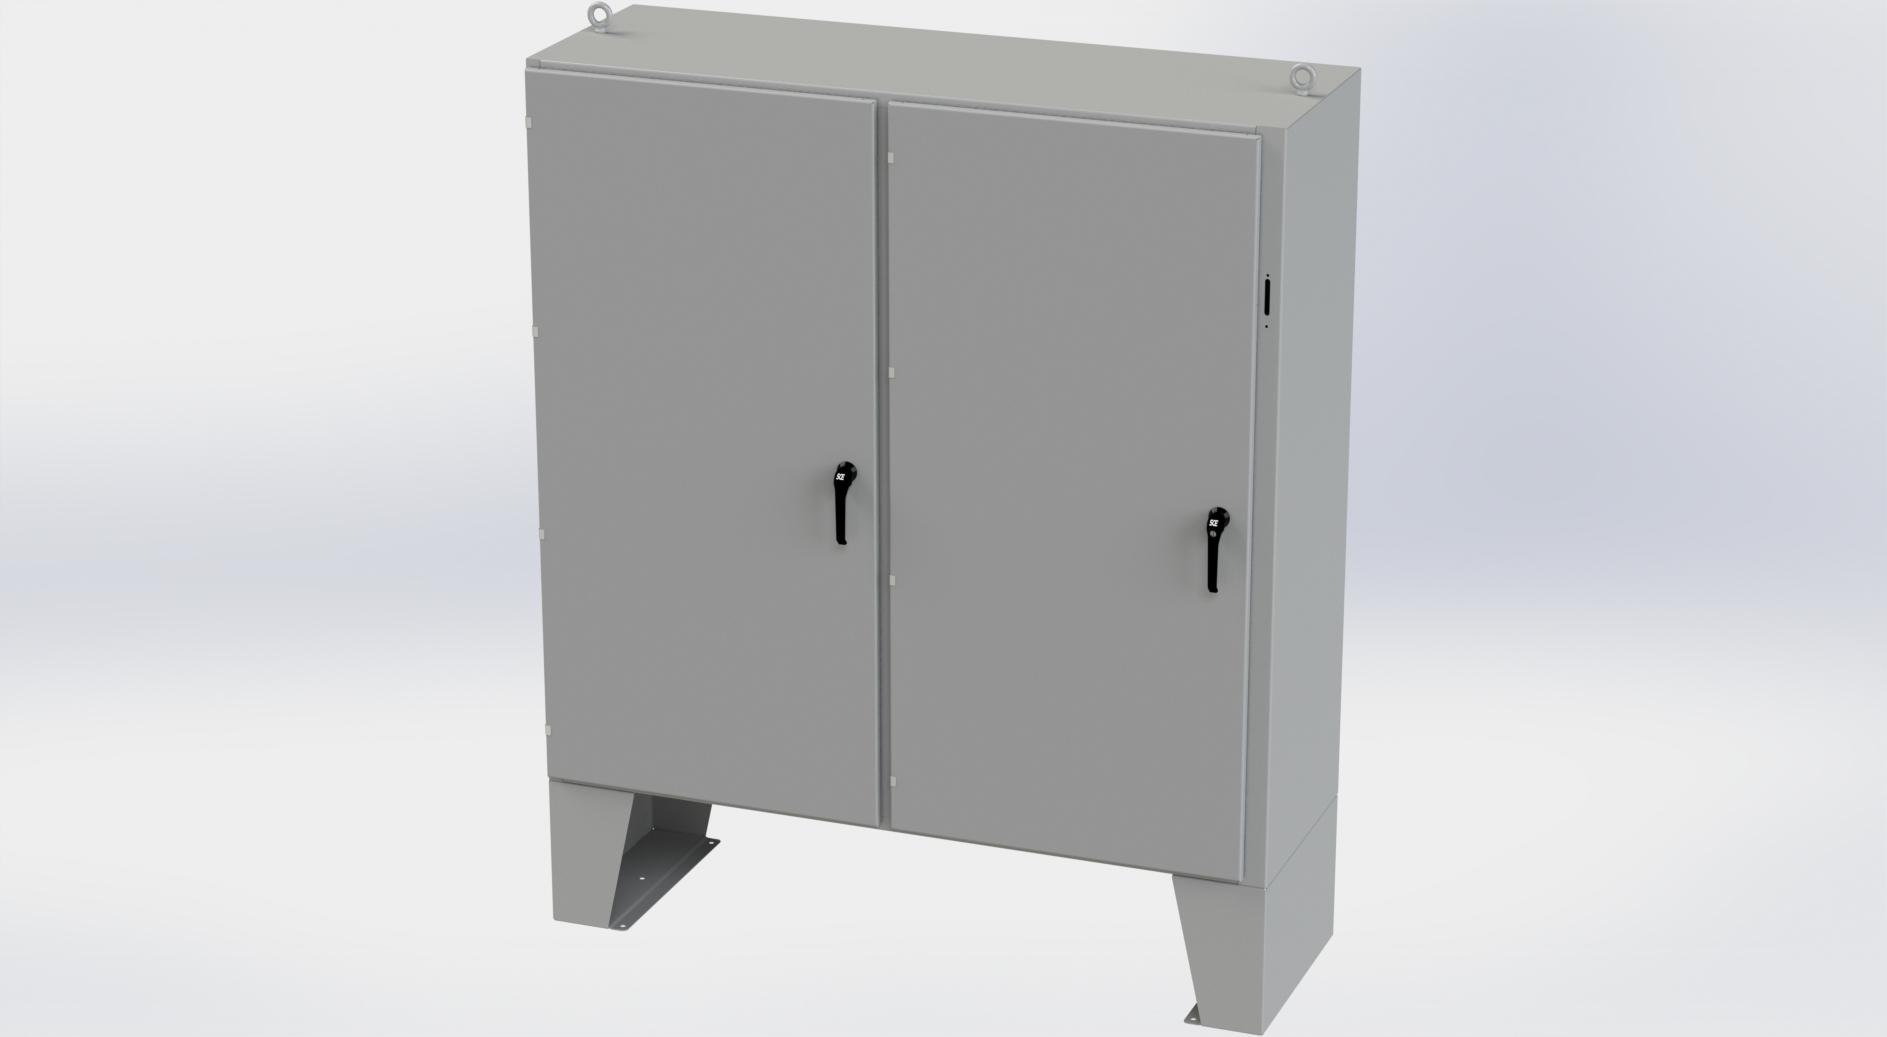 Saginaw Control SCE-72X7324LP 2DR X LP Enclosure, Height:72.00", Width:73.00", Depth:24.00", ANSI-61 gray powder coating inside and out. Optional sub-panels are powder coated white.